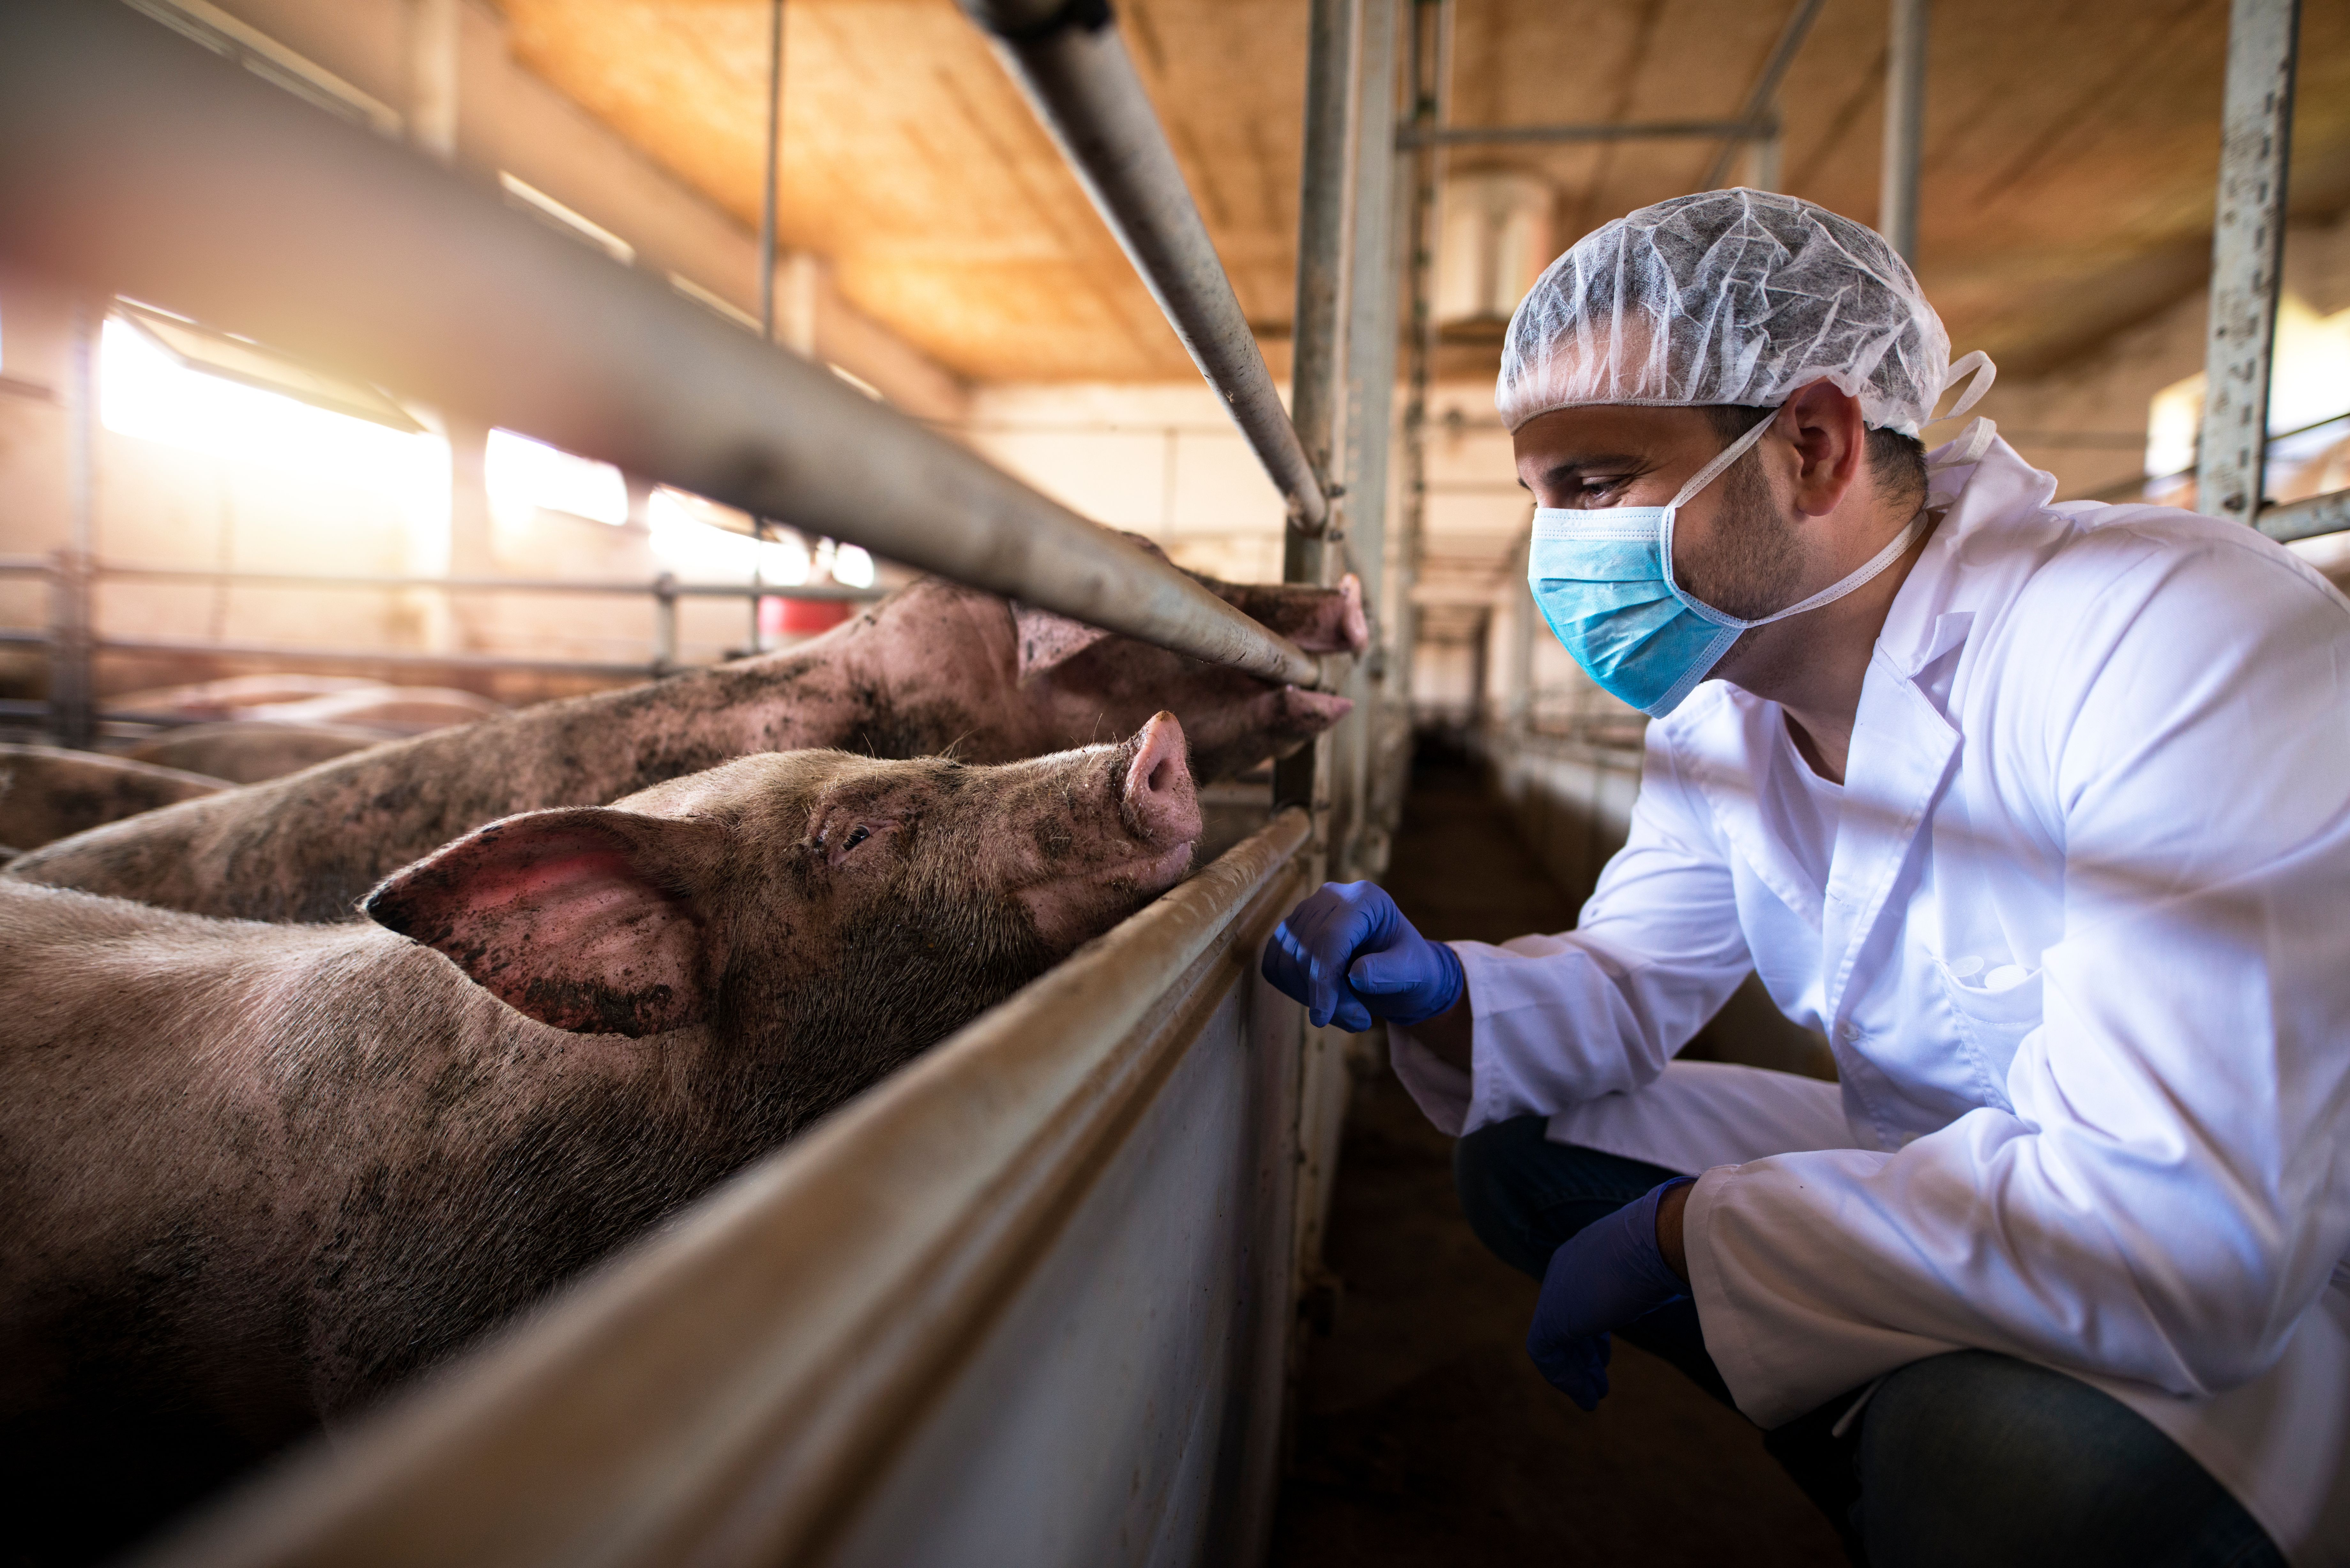 Antibiotic-resistant strains of the dangerous superbug C difficile have been identified in pigs and humans, suggesting zoonotic transmission is possible.